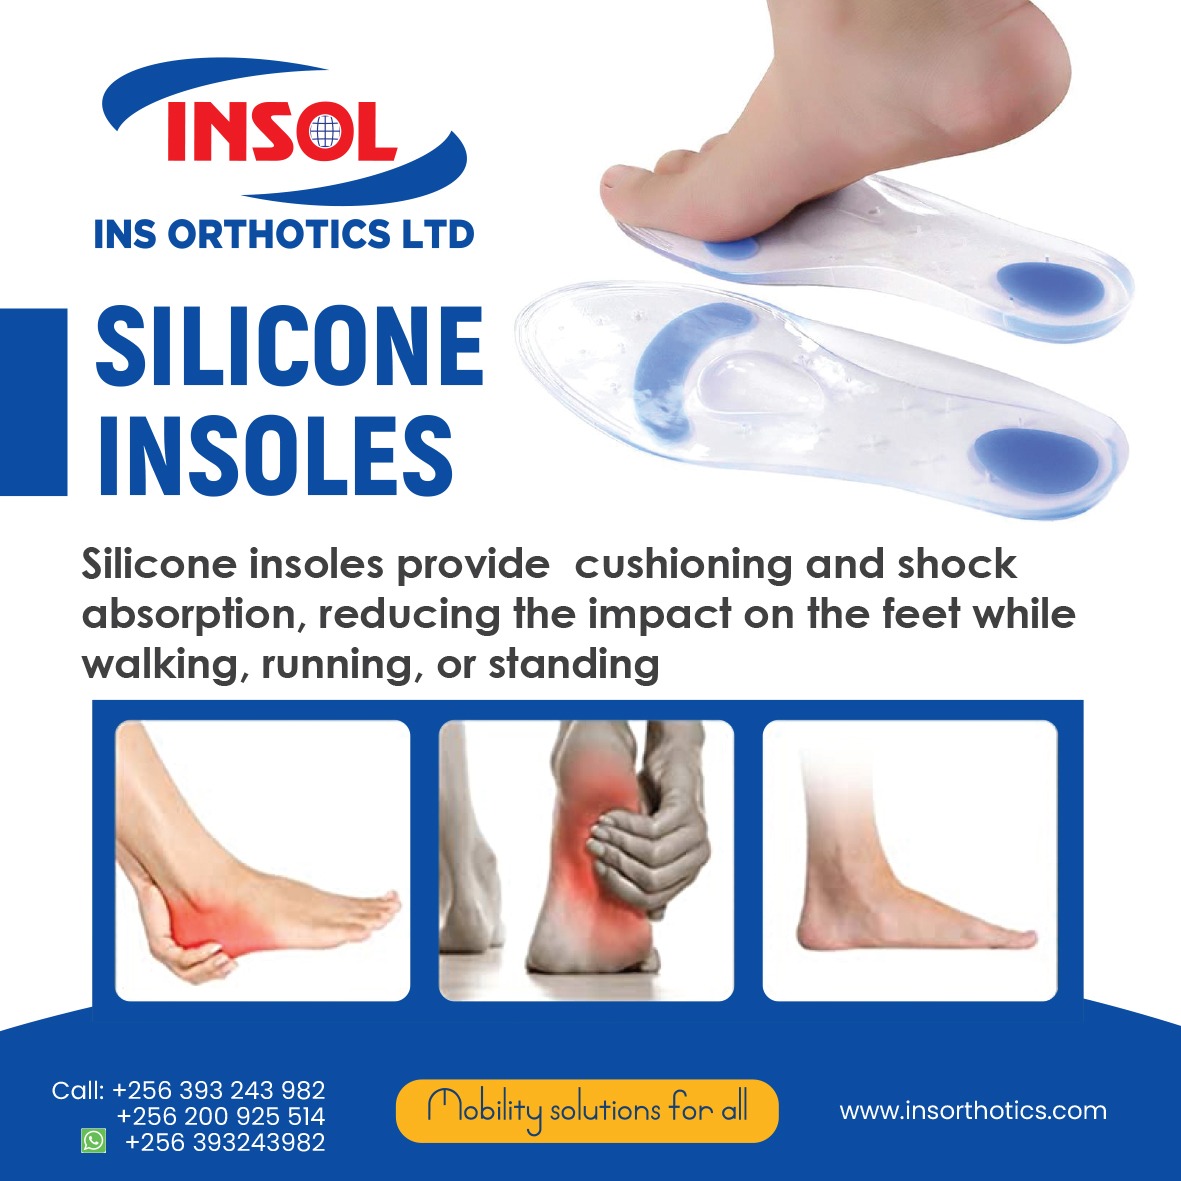 Silicon insoles provide comfort and support to your feet. They are crafted from high-quality silicone material to provide exceptional cushioning and shock absorption to distribute  weight more evenly, reducing excessive pressure on specific areas like the balls of the feet.